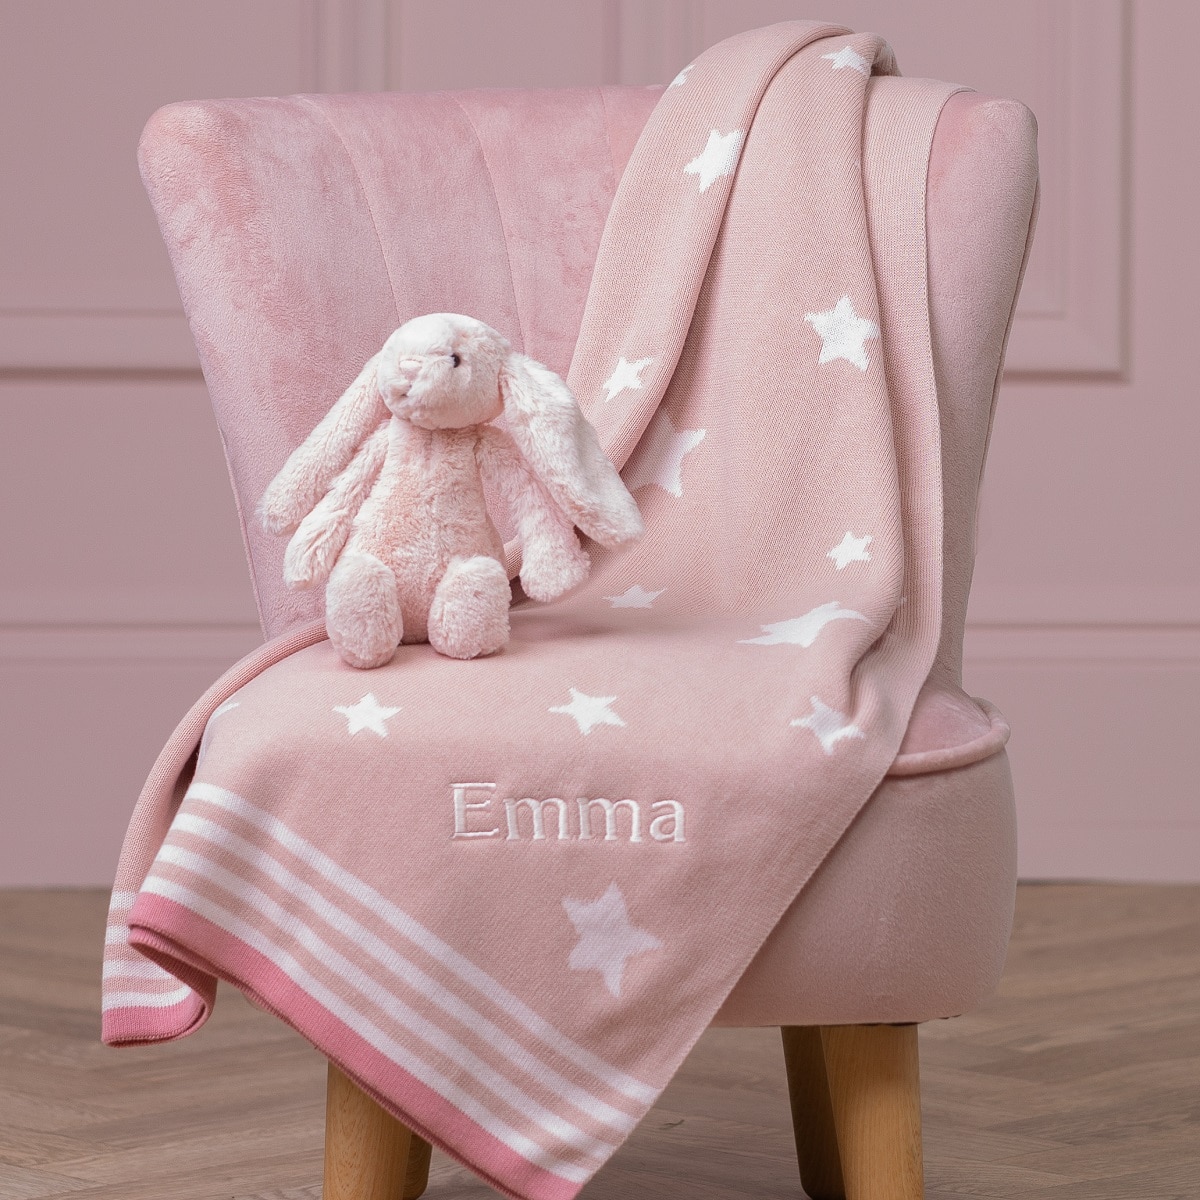 Ziggle personalised pink stars cotton knitted baby blanket